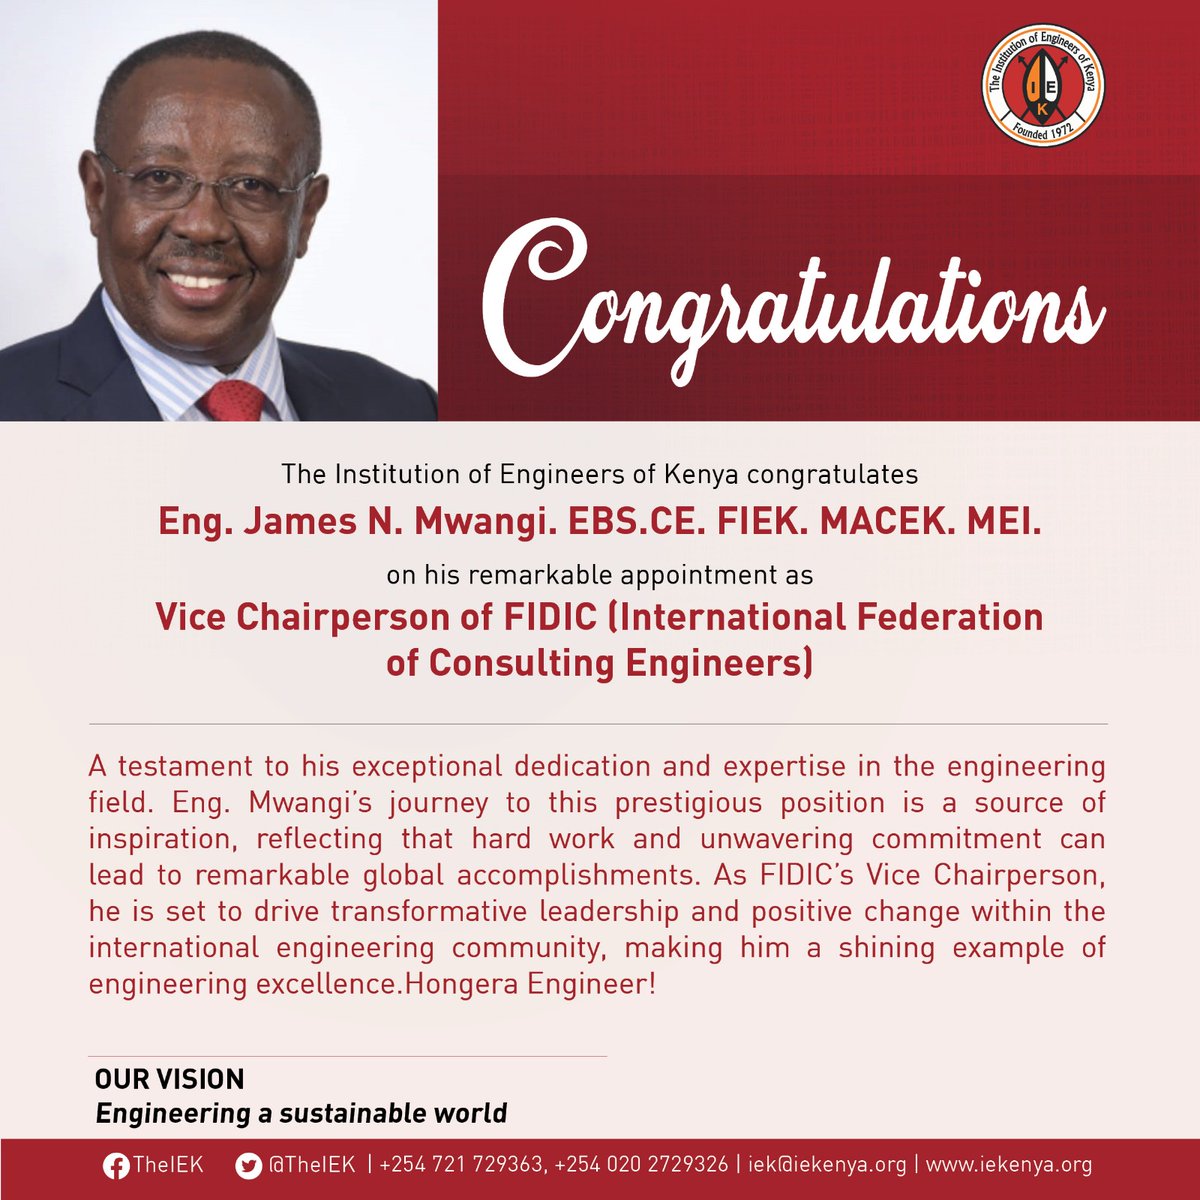 Congratulations to Eng.James Mwangi  on his appointment as Vice President @FIDIC!
Your dedication to Engineering excellence is truly inspiring.Congratulations! 
#EngineeringLeadership 
#EngineeringExcellence 
@EngineersBoard